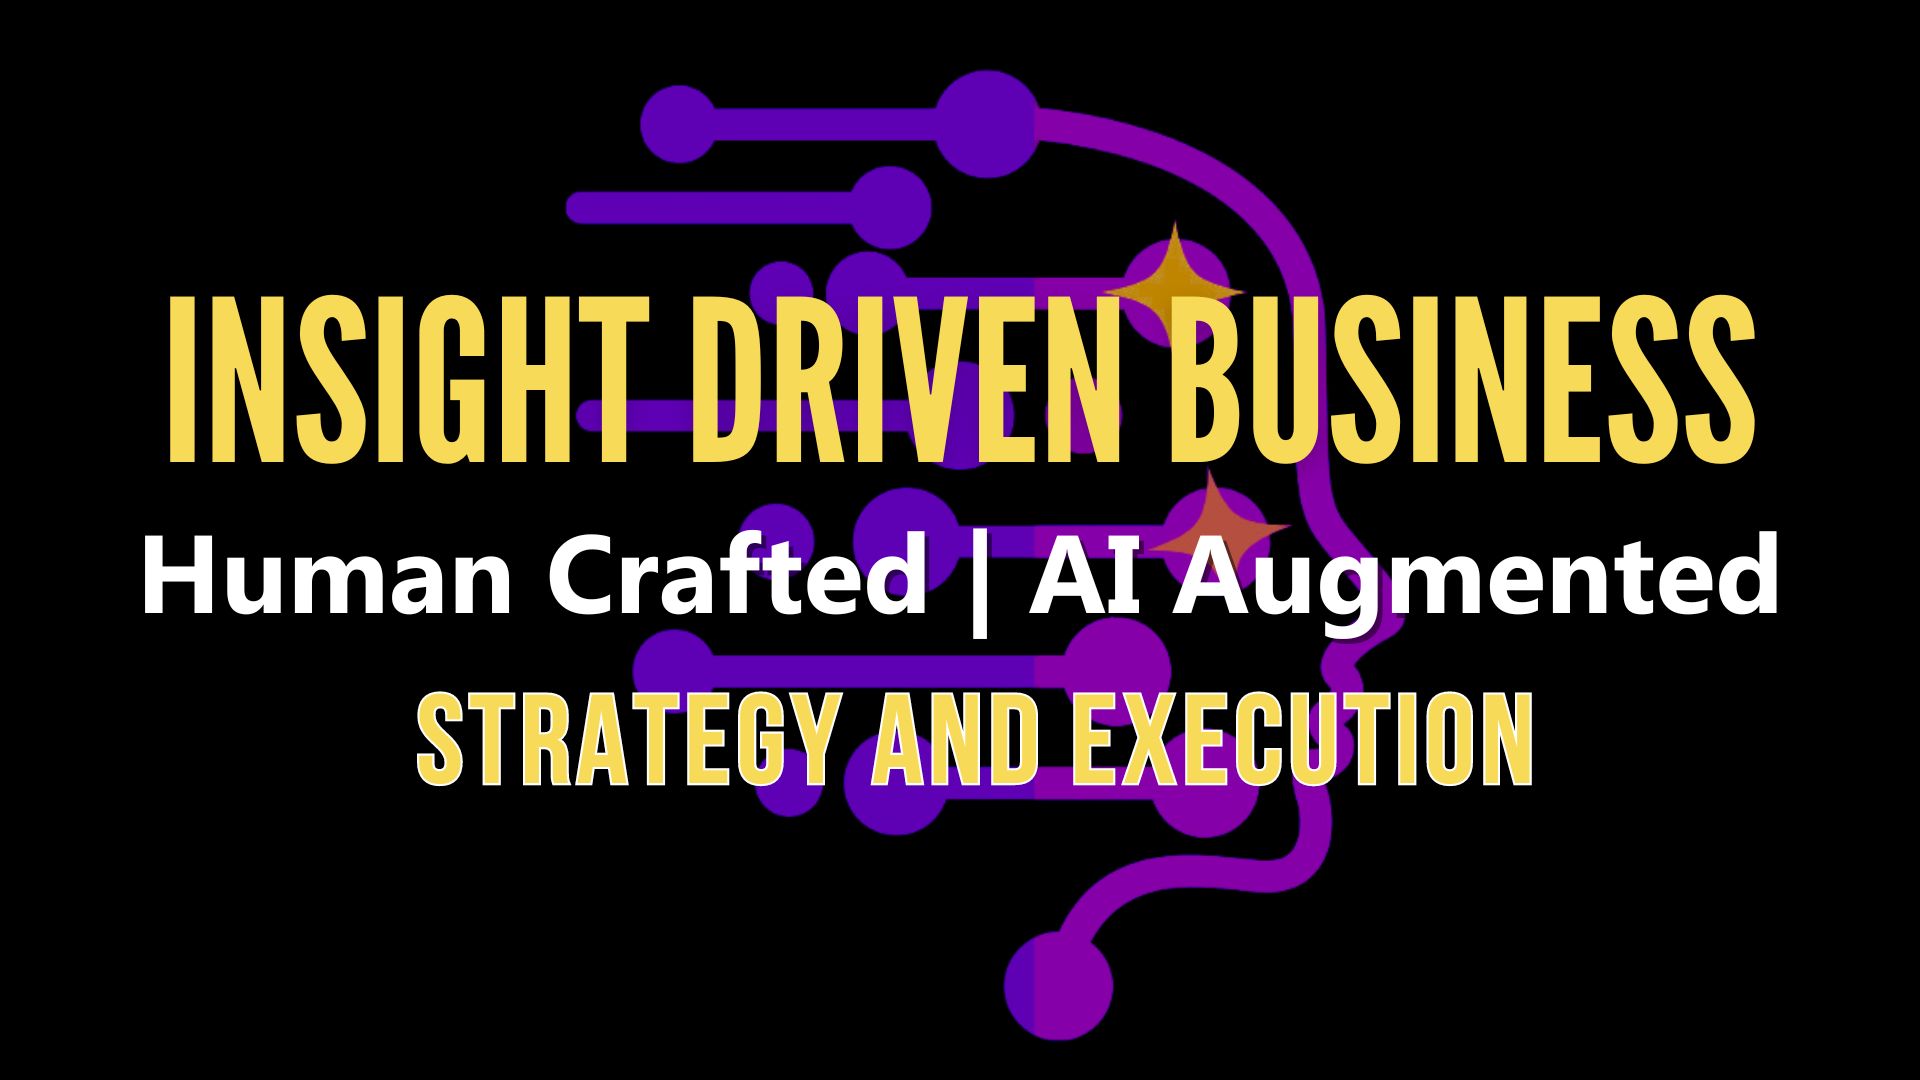 Insight Driven Business